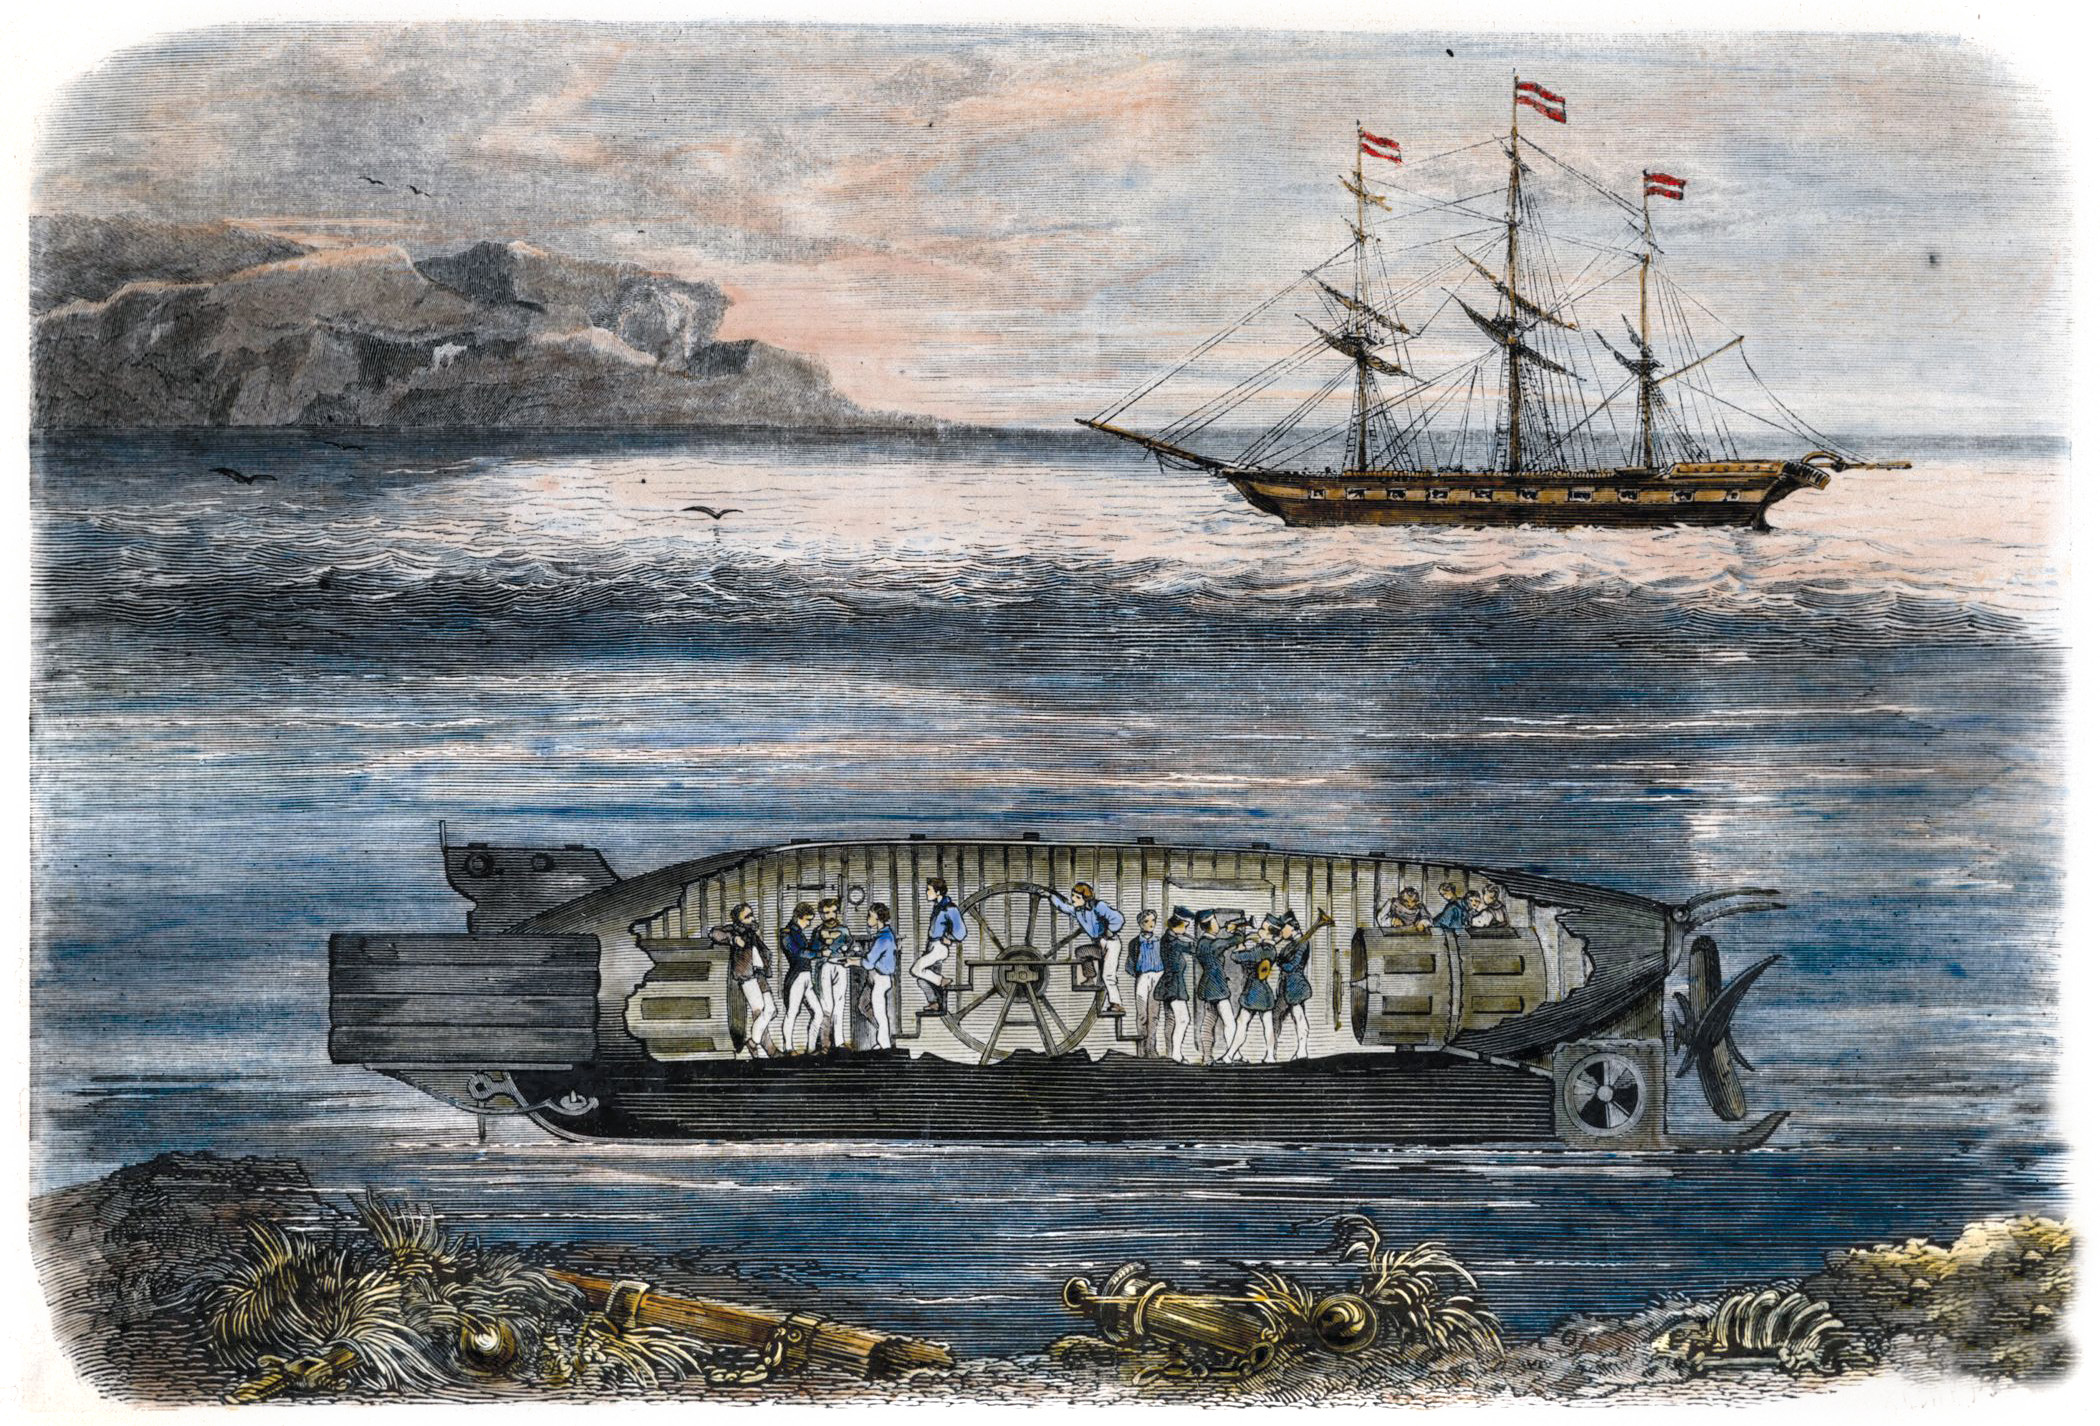 A colored engraving shows a cutaway view of Wilhelm Bauer’s 1855 Brandtaucher.